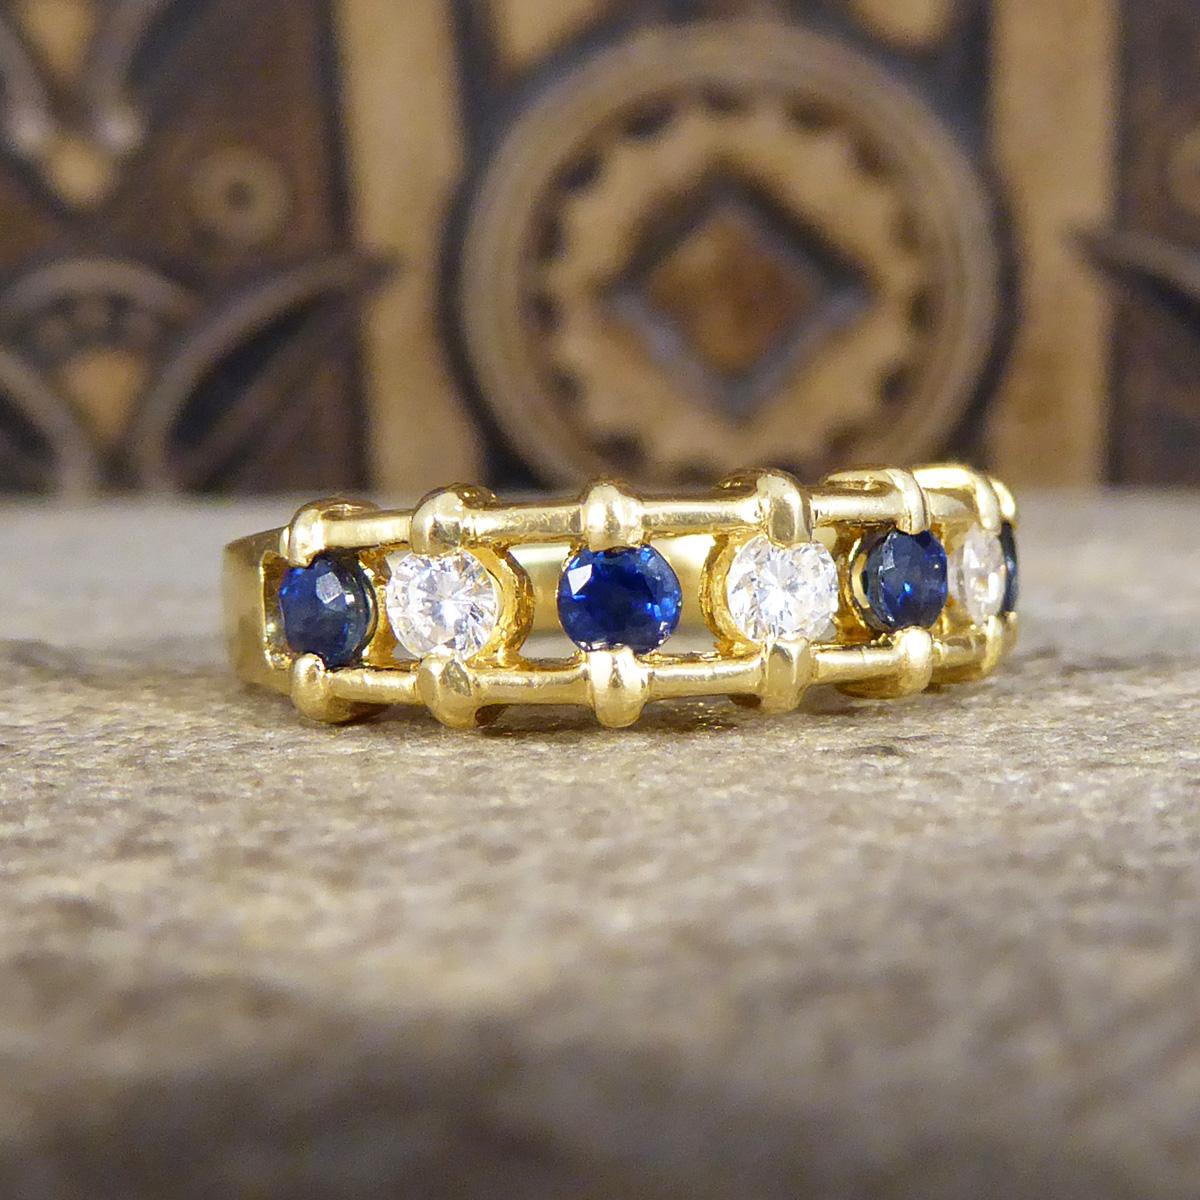 An usual and beautiful ring design consisting of 7 alternating Sapphires and Diamonds in a ladder like design with spaces between the stones. The ring holds three Diamonds totalling 0.21ct and four bright and vibrant Sapphires totalling 0.32ct. A